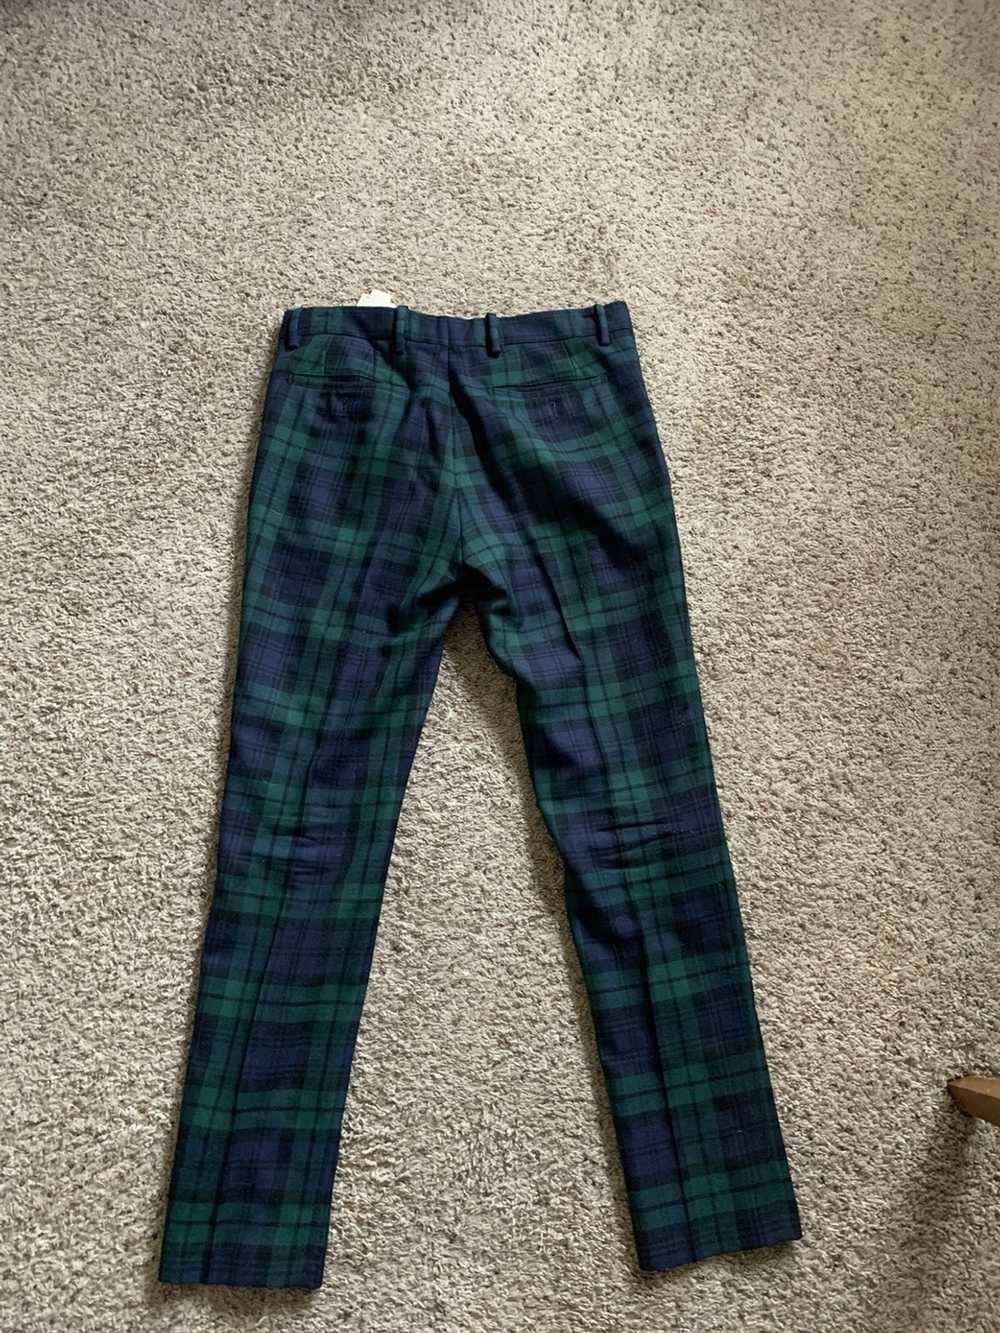 Burberry Burberry Checkered Wool Pants - image 1